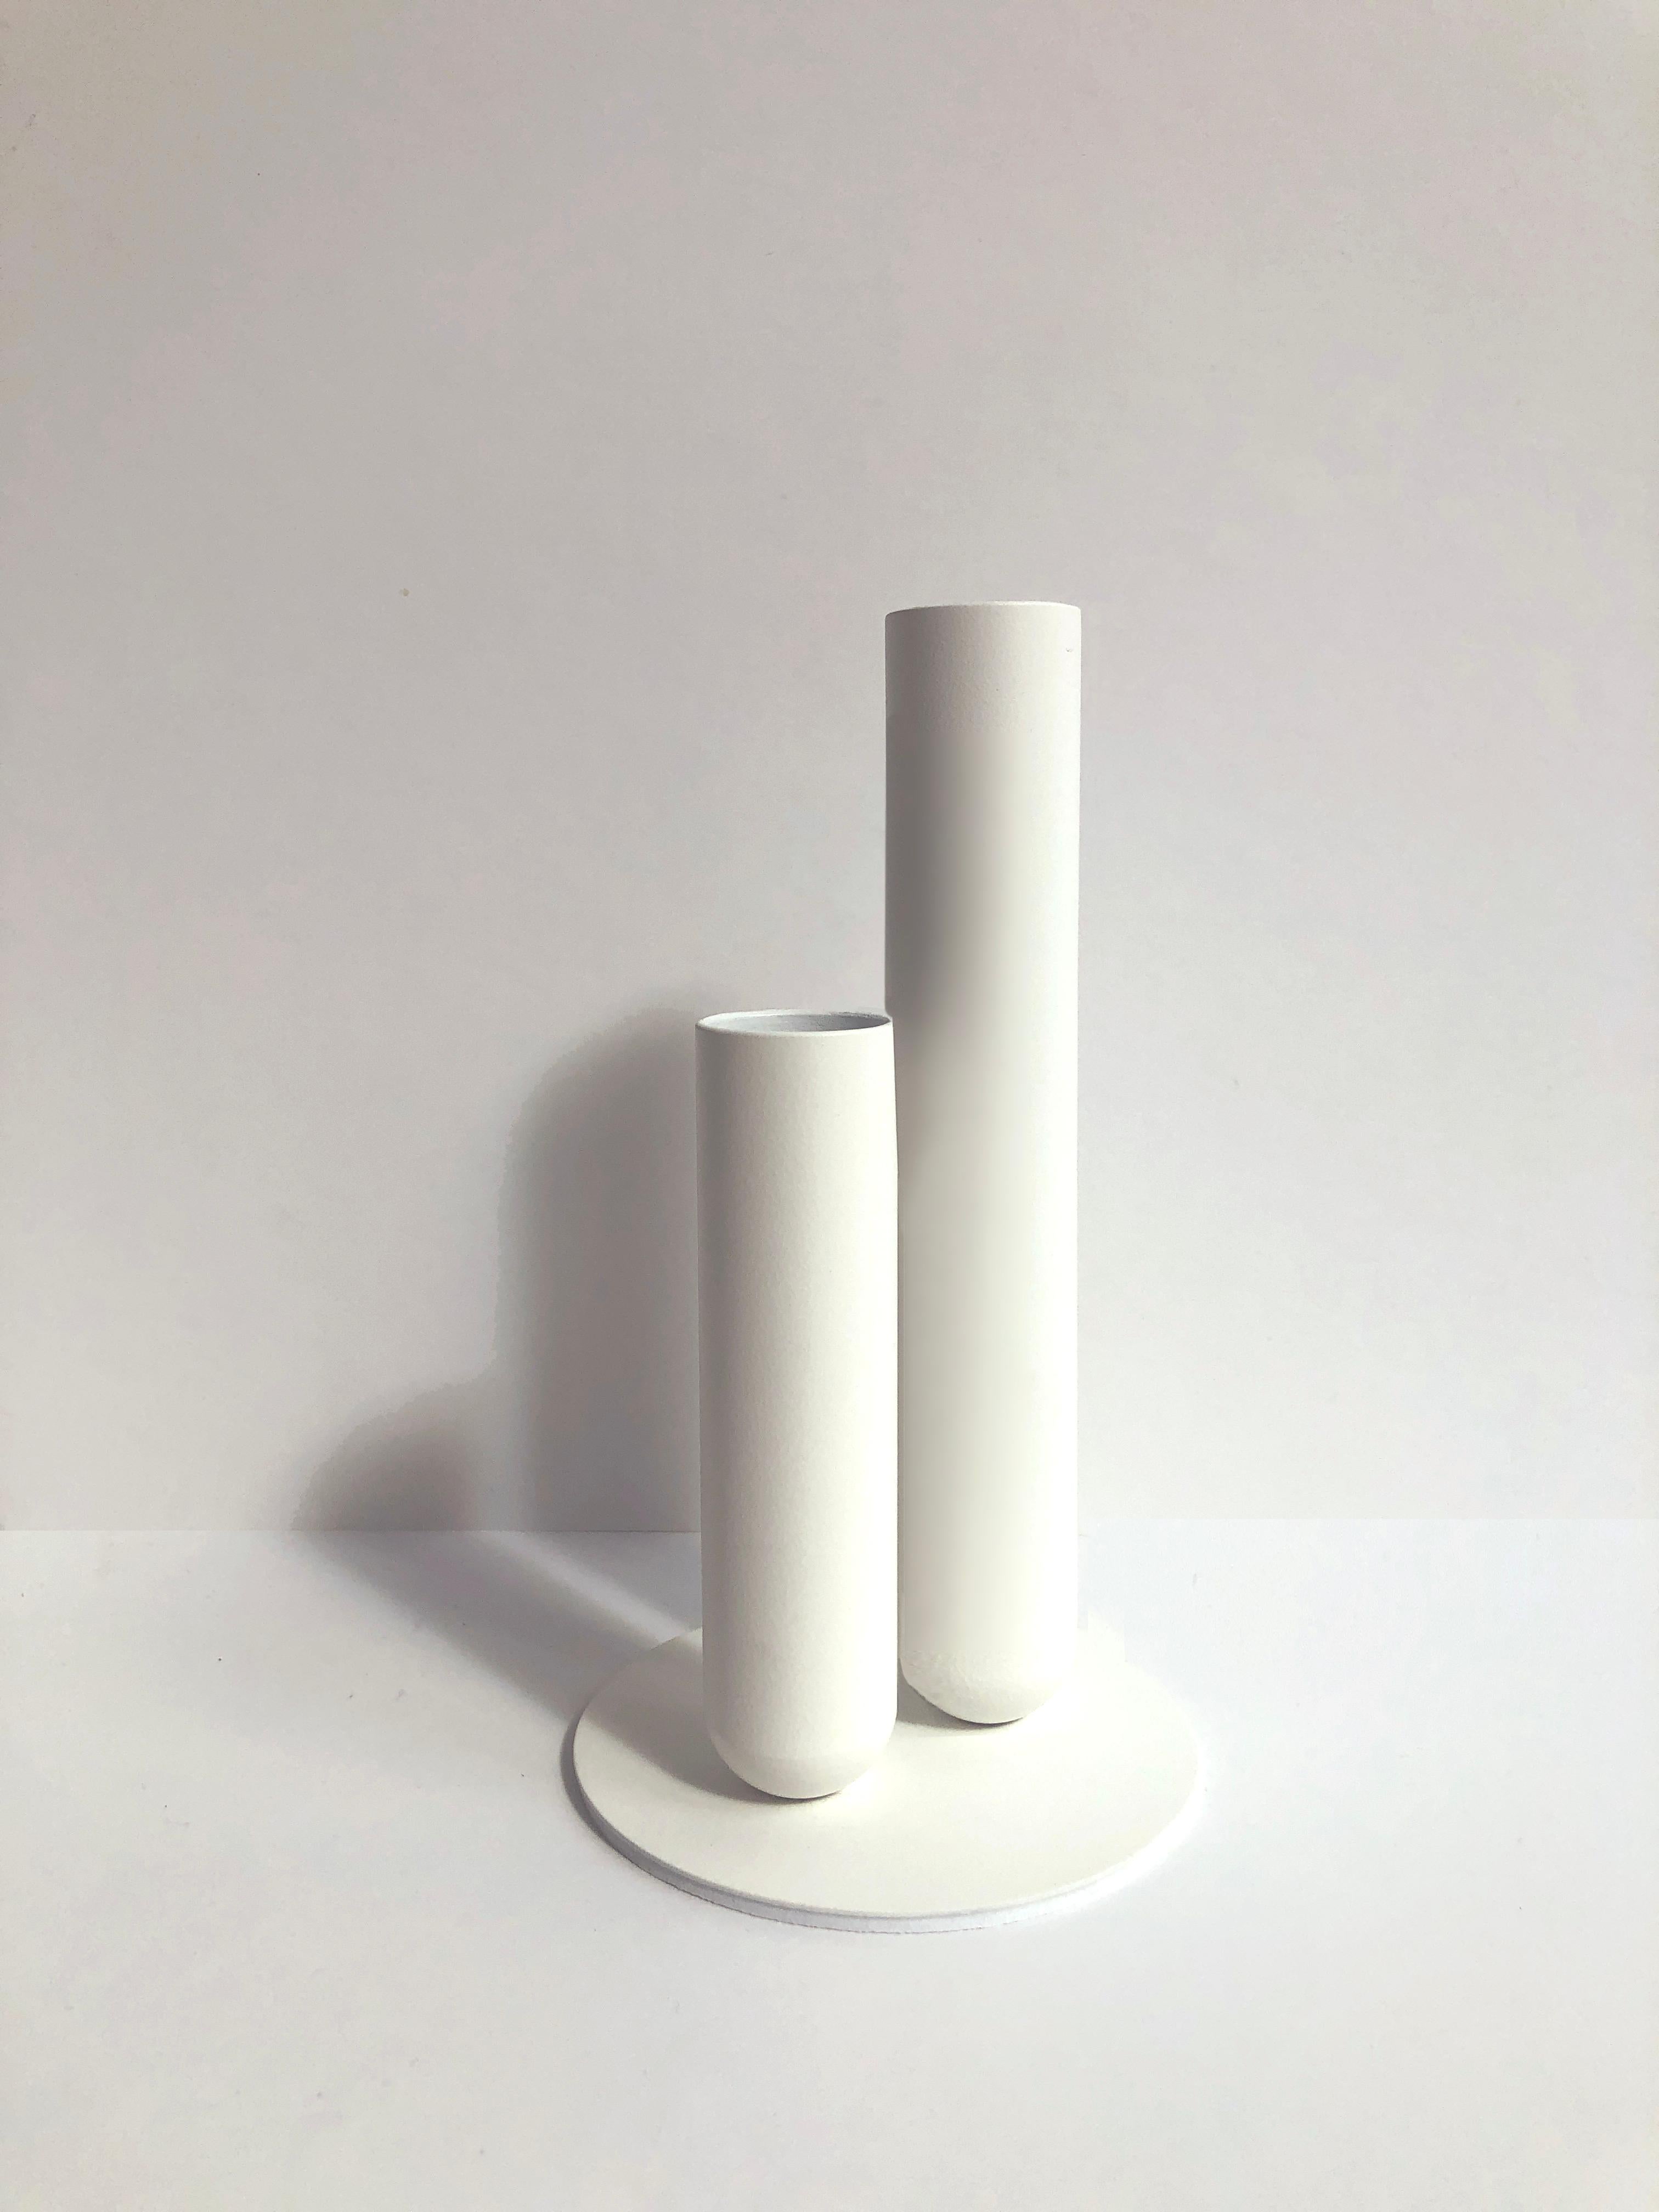 Soliflore White Vase by Mademoiselle Jo
Dimensions: Ø 8.5 x H 15 cm.
Materials: Turned metal with magnet and EVA foam tray.

Hollow cylinders of 15 cm and 10 cm, diameter 2.5 cm. Plate diameter of 8.5 cm. Metal version with matt white or black